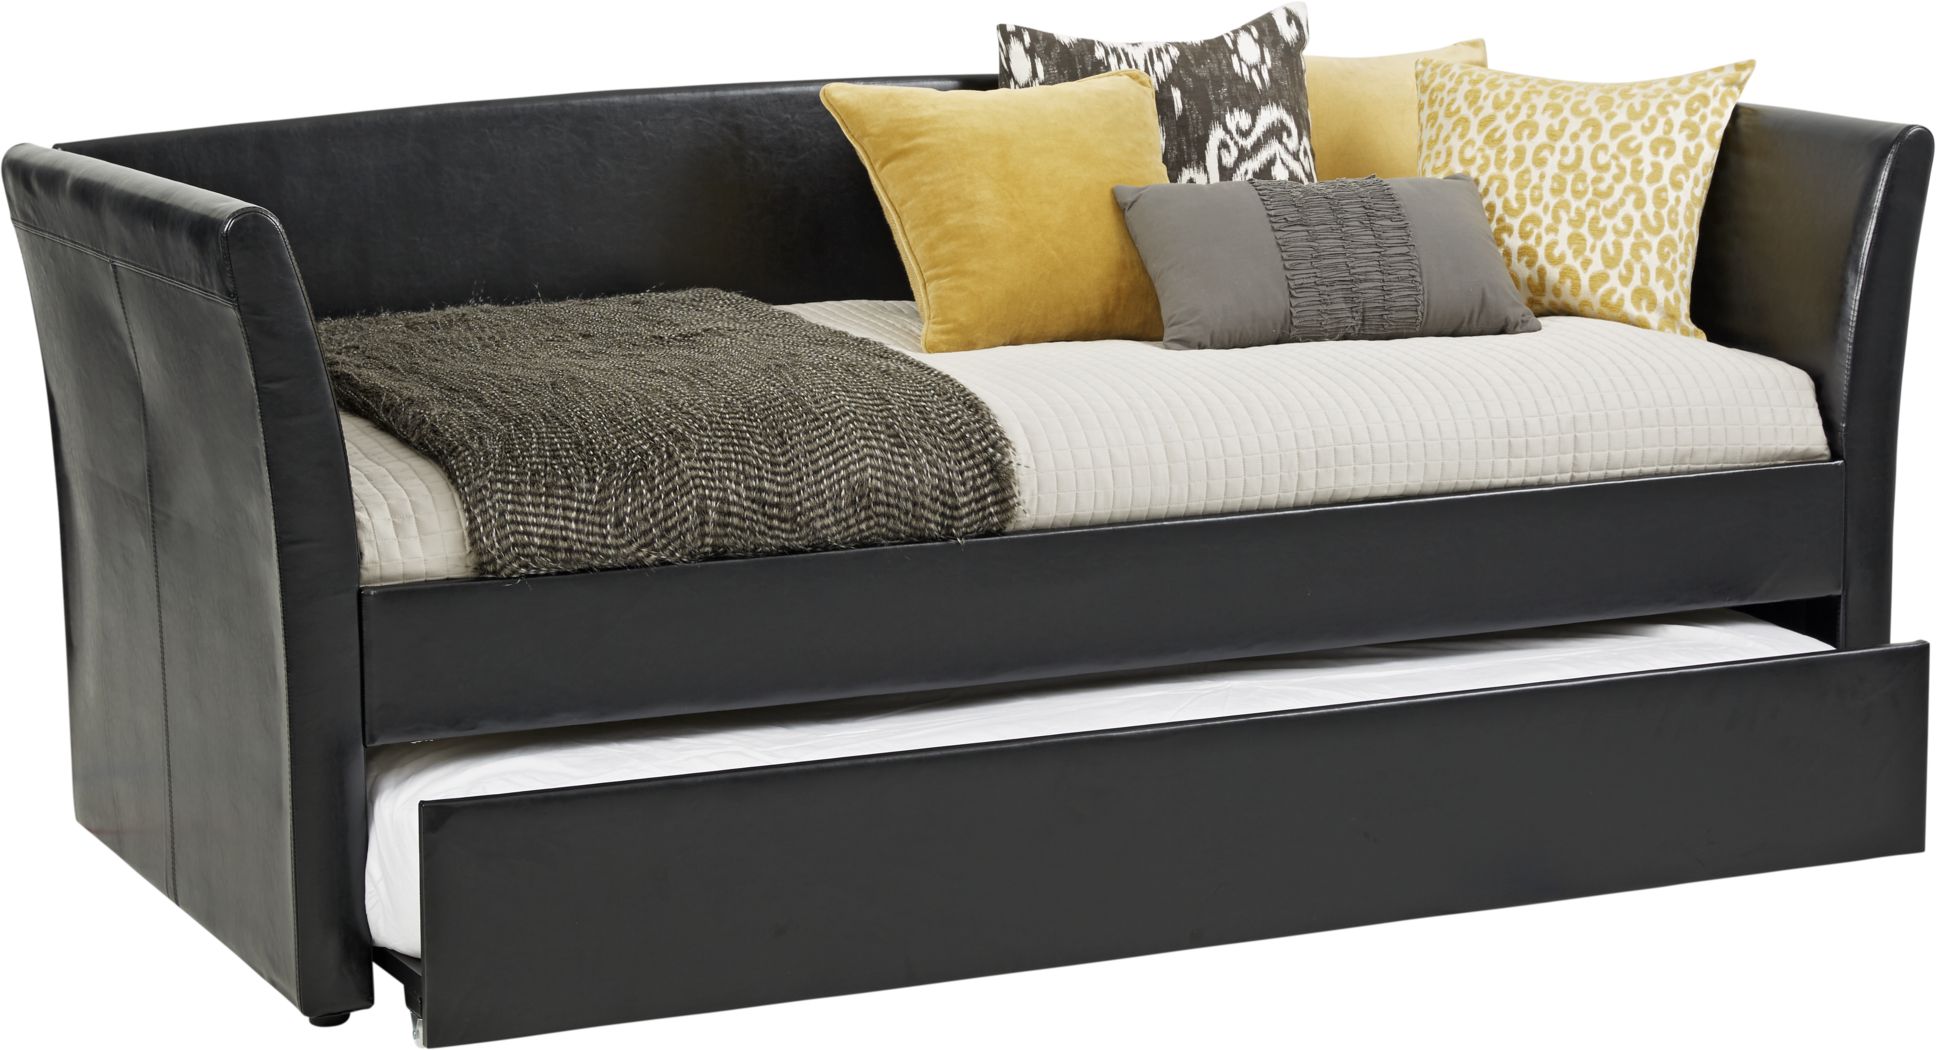 Leather Daybeds With Trundle, Leather Daybed With Pop Up Trundle Bed